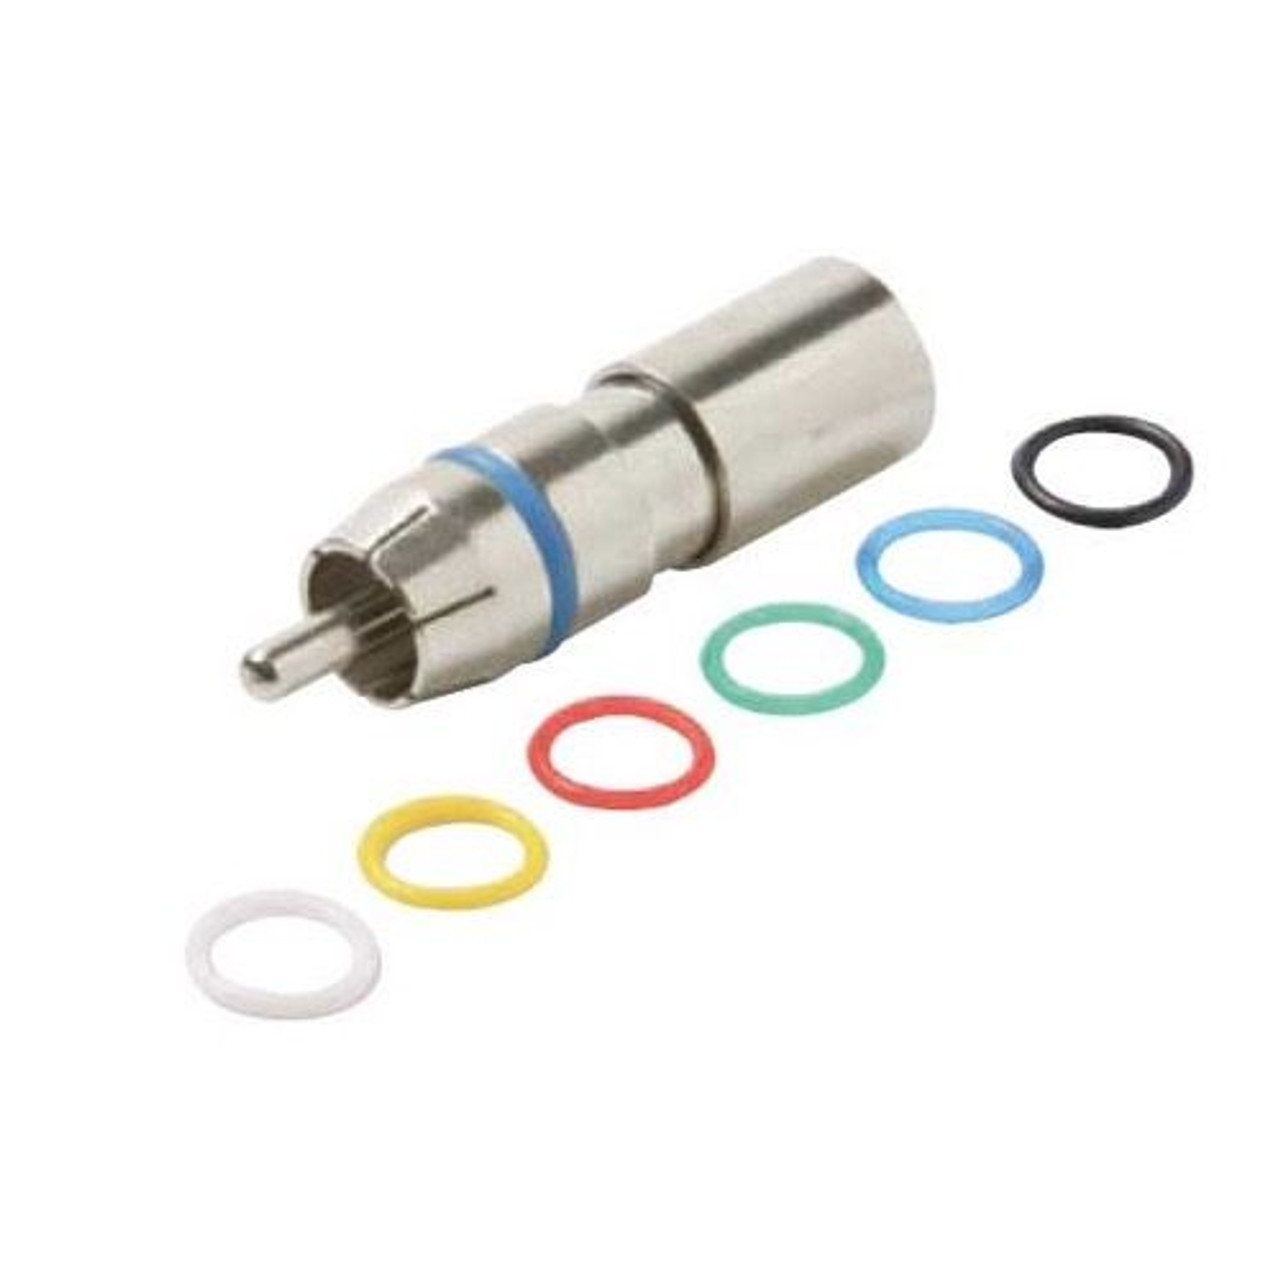 Steren 200-069 RCA PermaSeal II Mini RG59 Coaxial Compression Connector 360 Degree Connect Nickel Plated Brass 6-Color Bands Audio Video Perma Seal II RG-59 A/V Connectors, 1 Pack, Part # 200-069